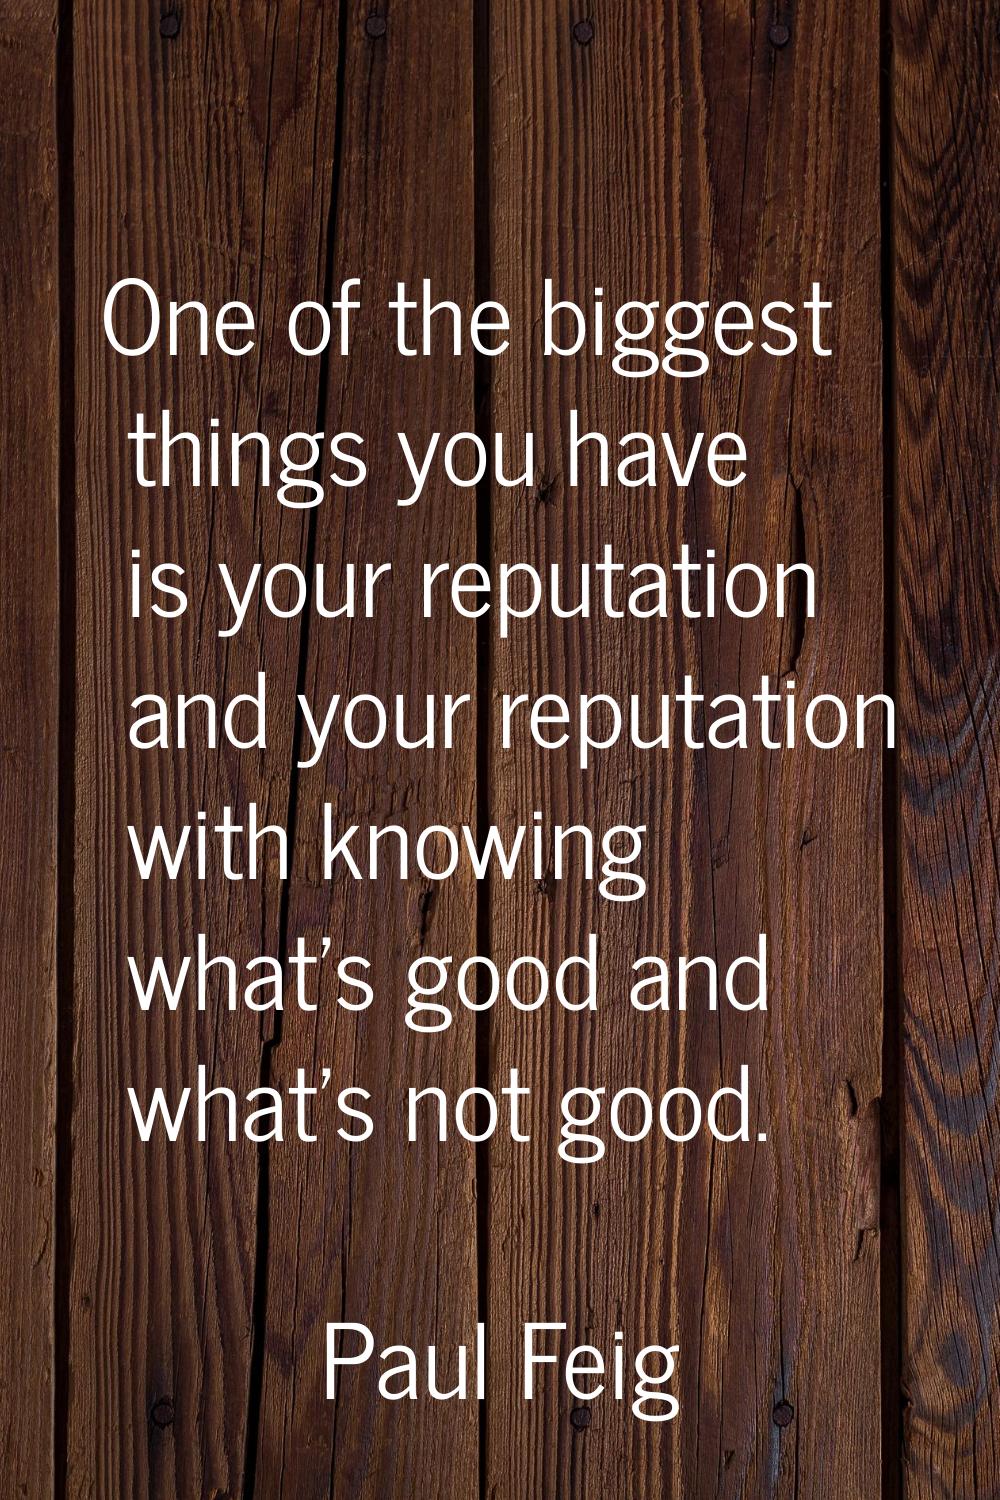 One of the biggest things you have is your reputation and your reputation with knowing what's good 